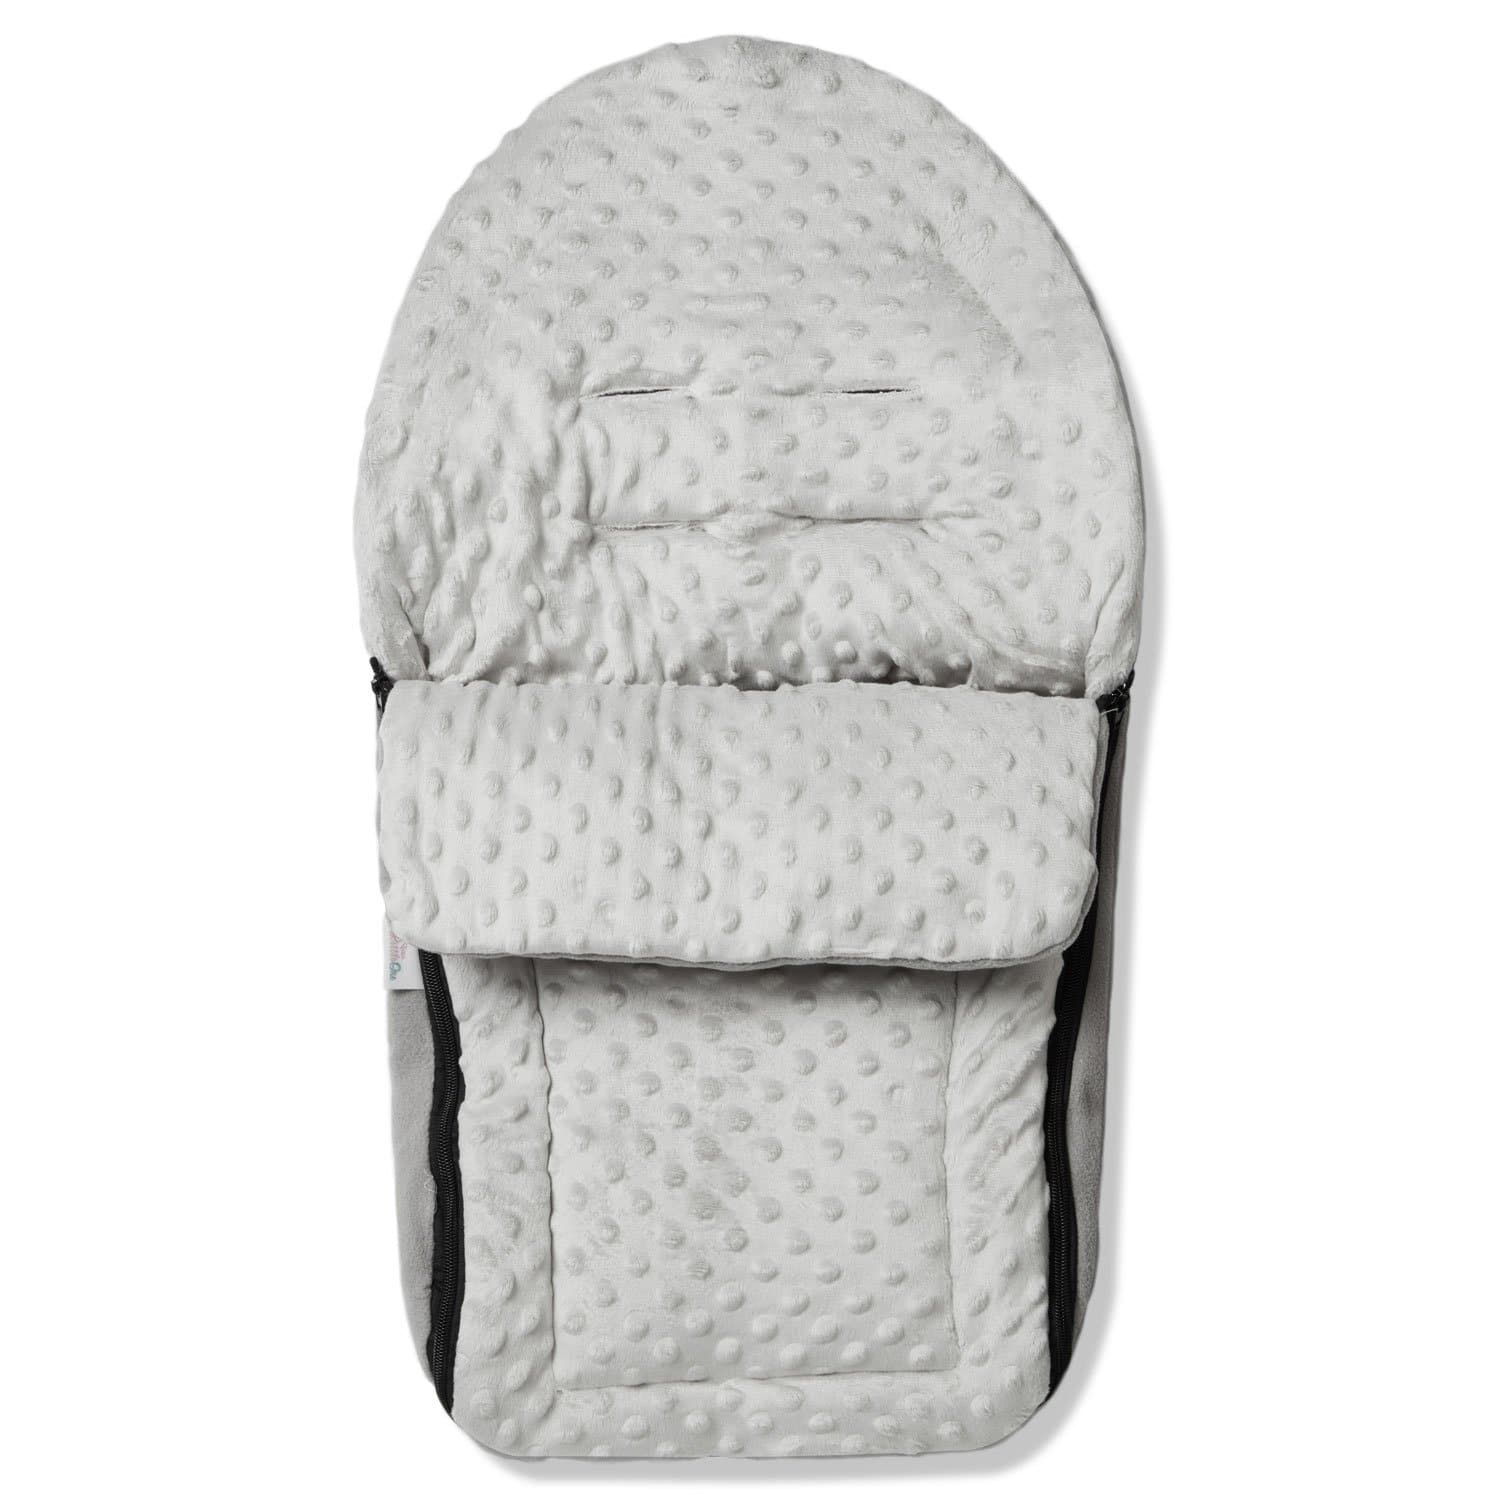 Dimple Car Seat Footmuff / Cosy Toes Compatible with Kinderkraft - Grey / Fits All Models | For Your Little One